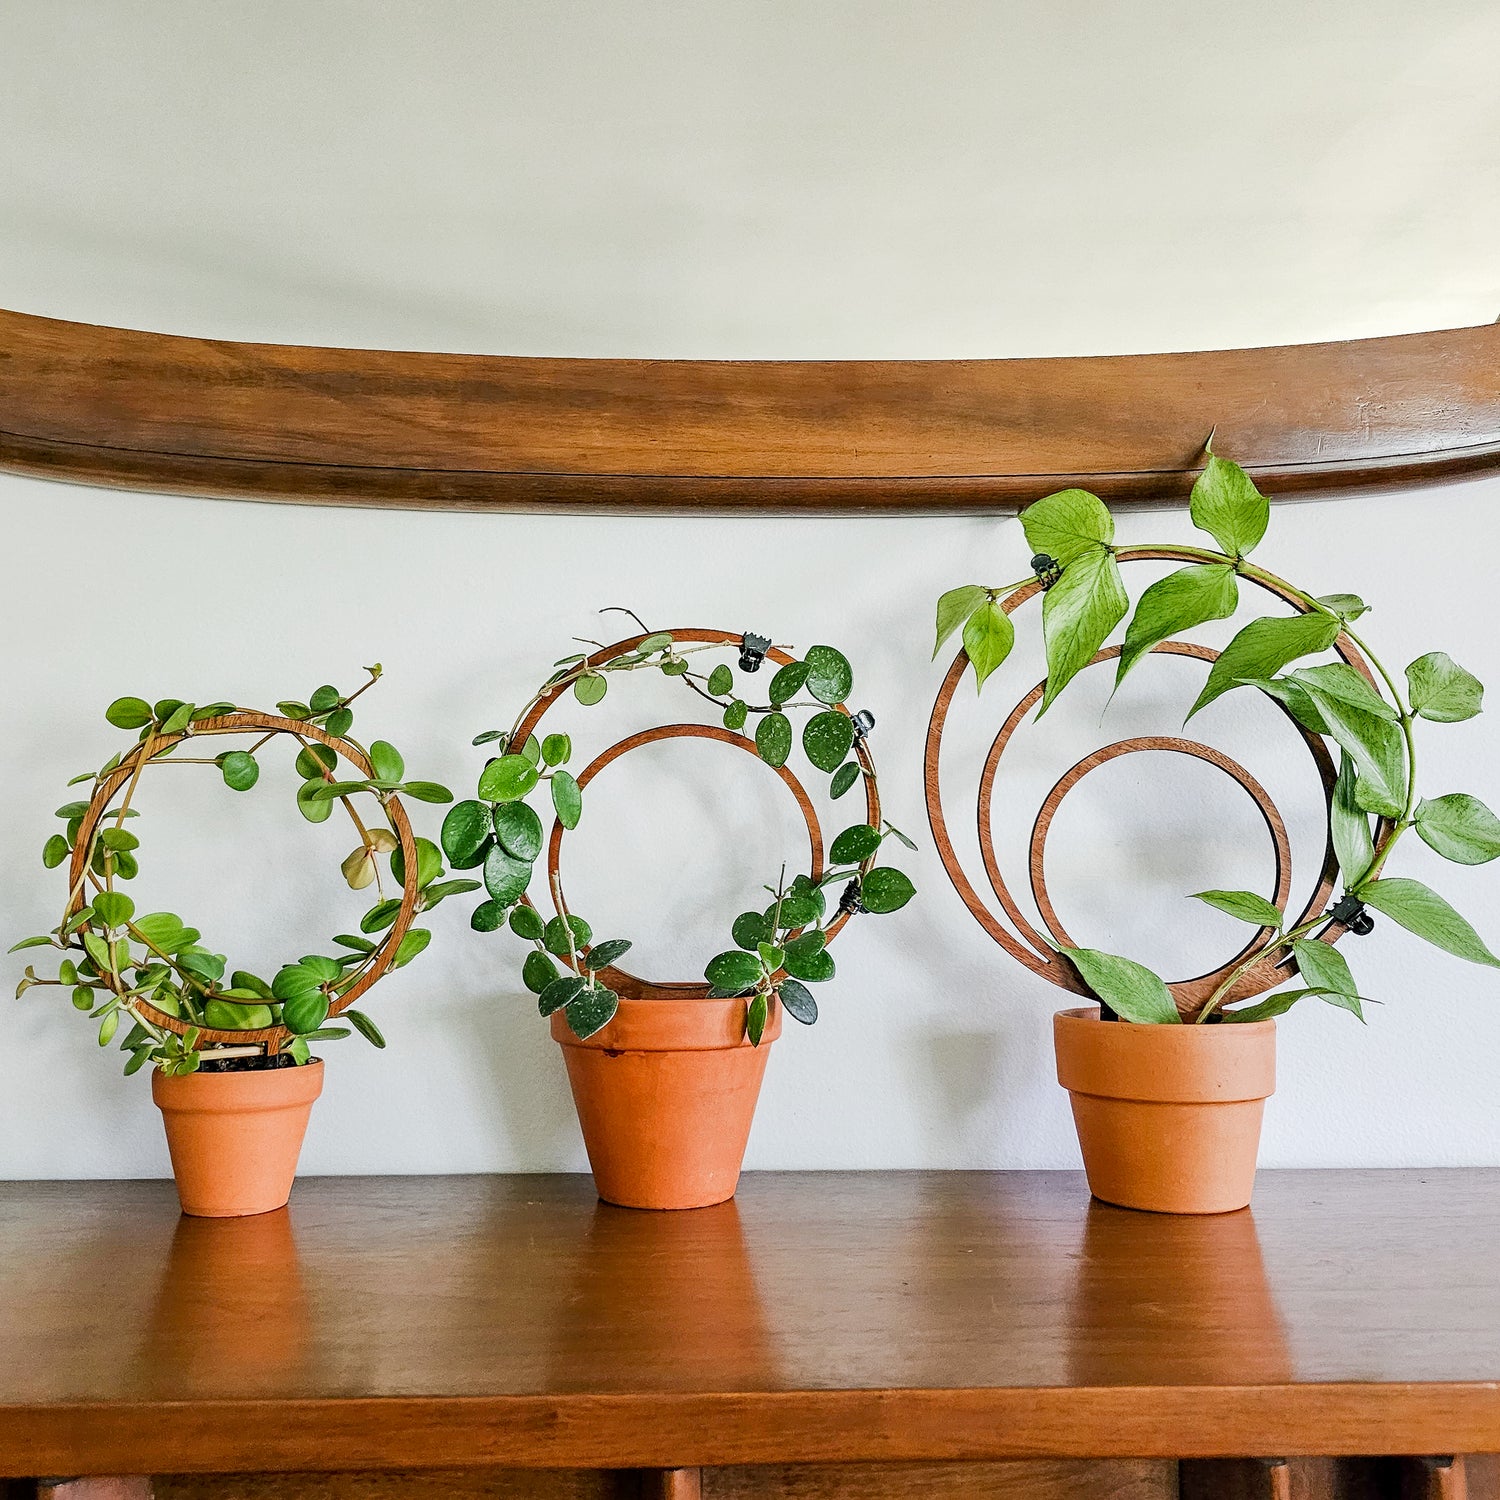 Set of 3 round, circle hoop style indoor plant trellises for small vining and climbing houseplants.